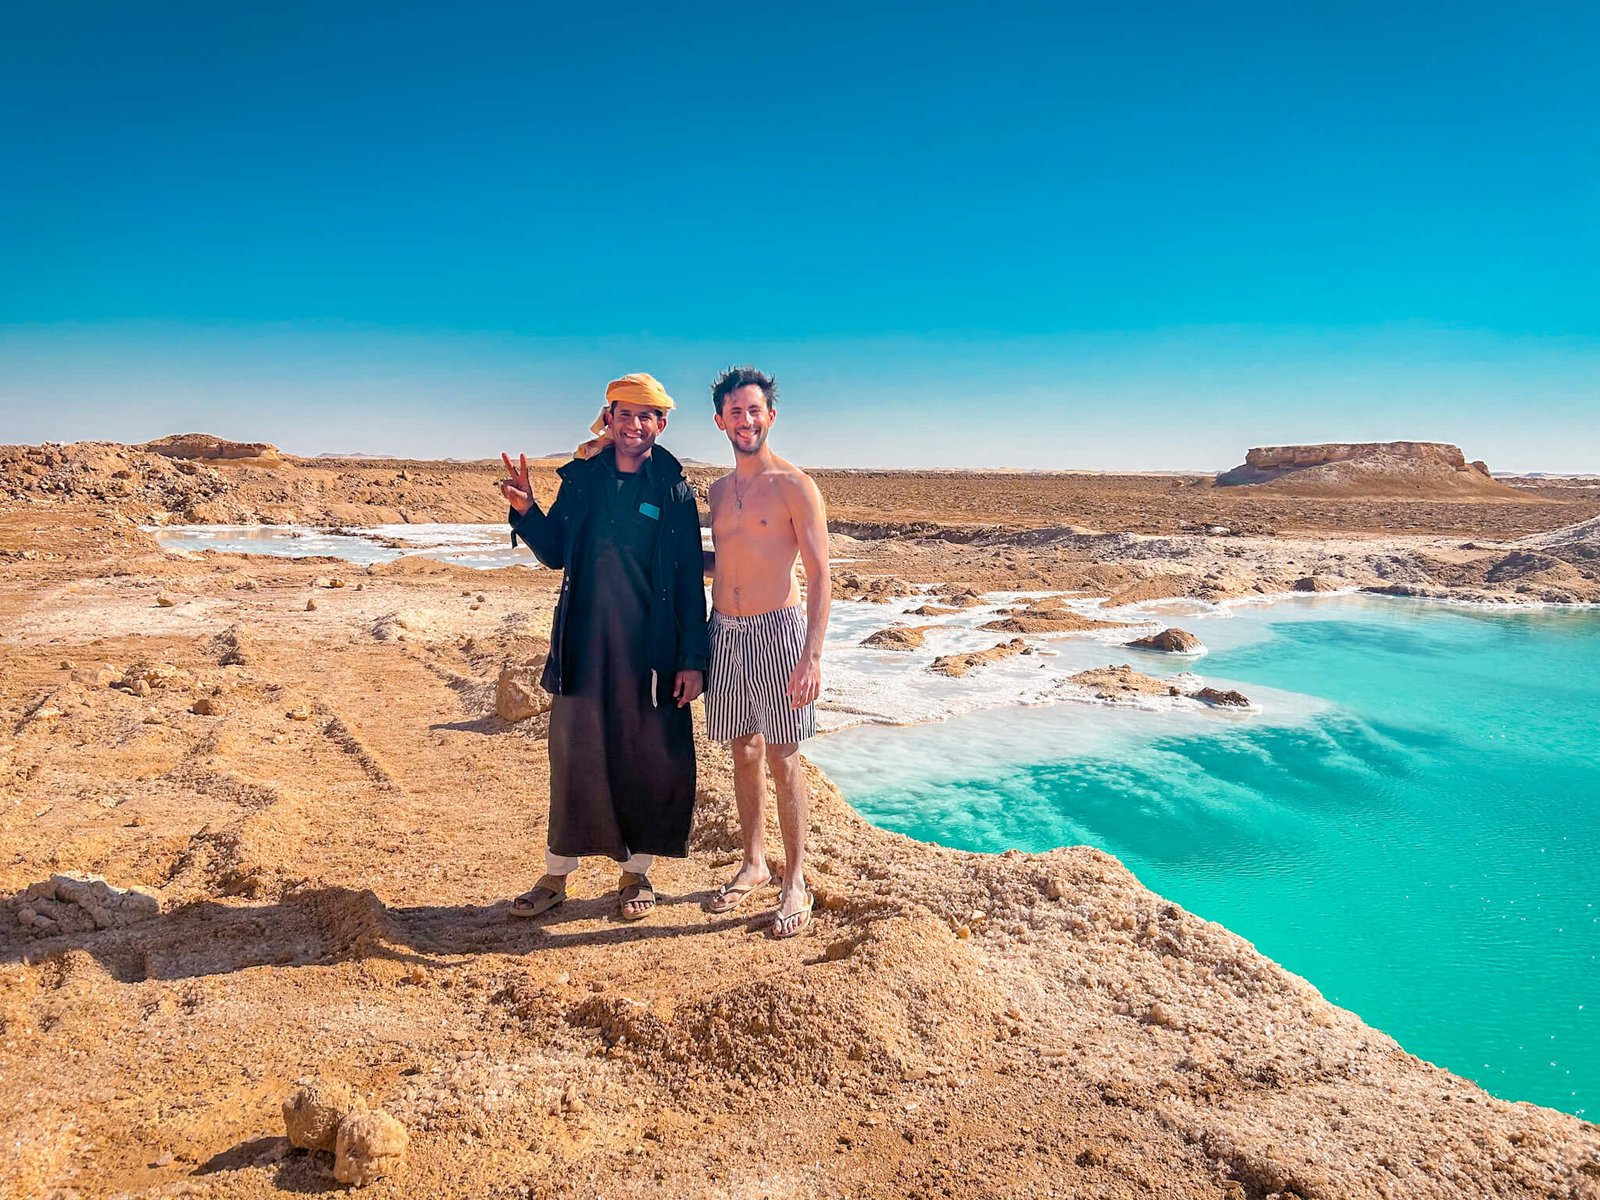 in Siwa Oasis in Egypt worth visiting